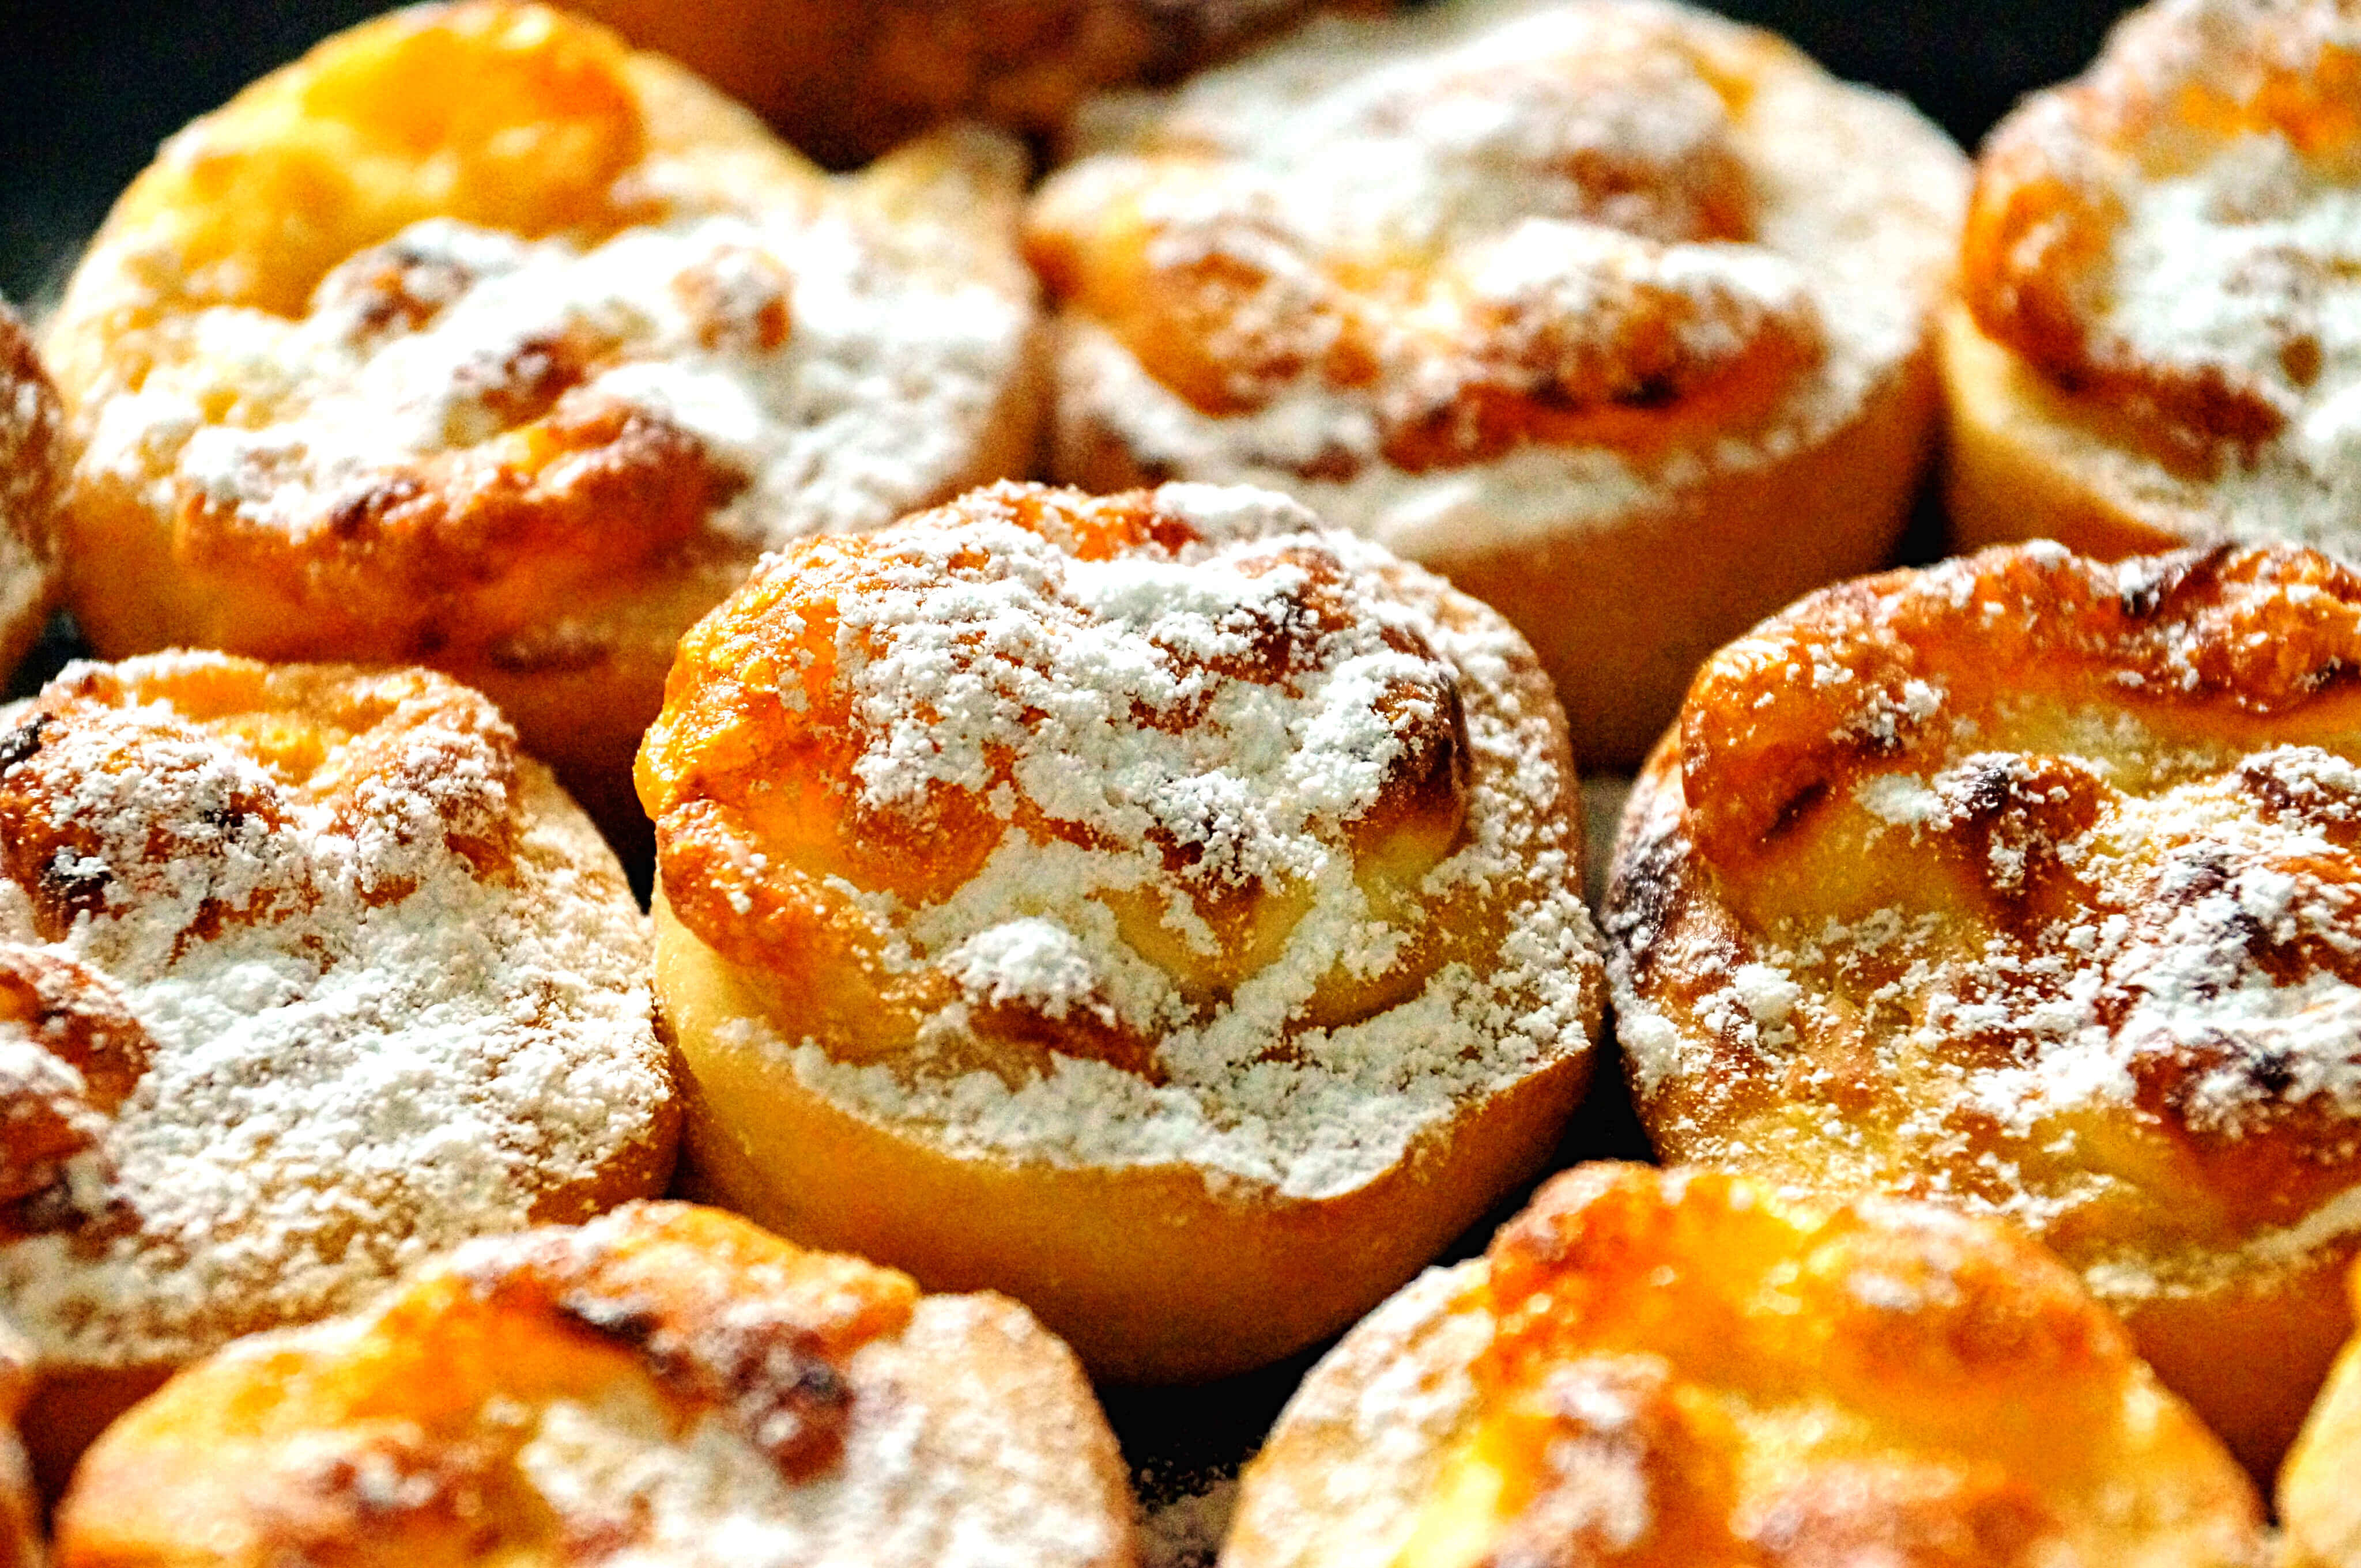 Close-up of freshly baked peach tarts dusted with powdered sugar